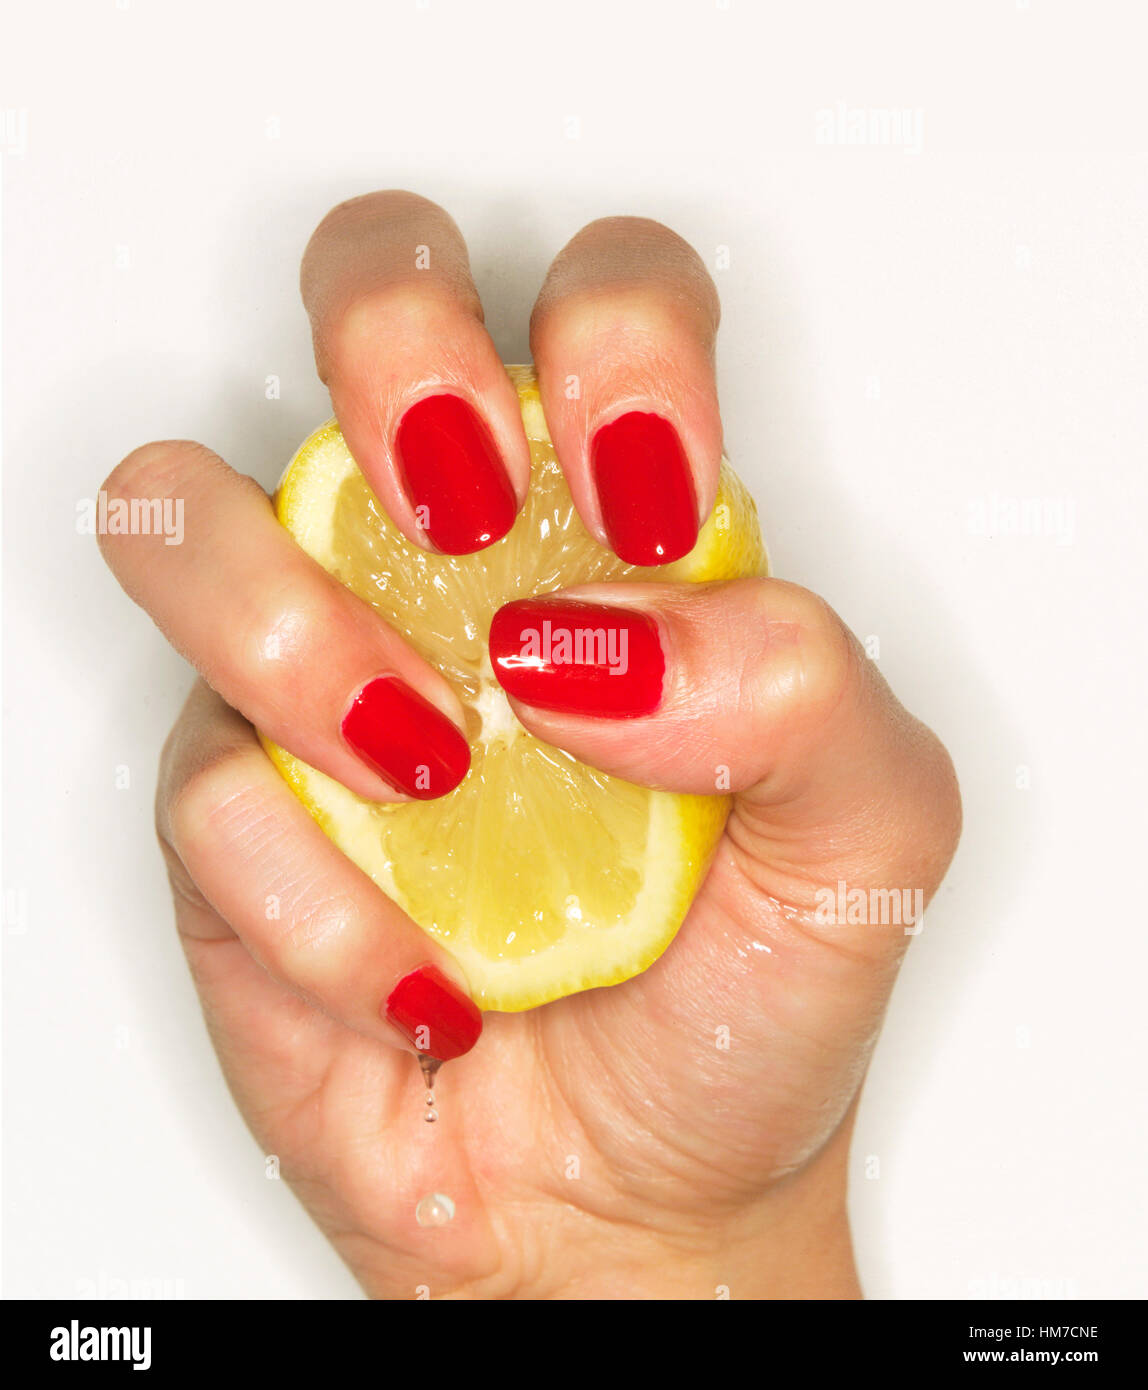 Hand of woman with red nail polish squeezing lemon Stock Photo